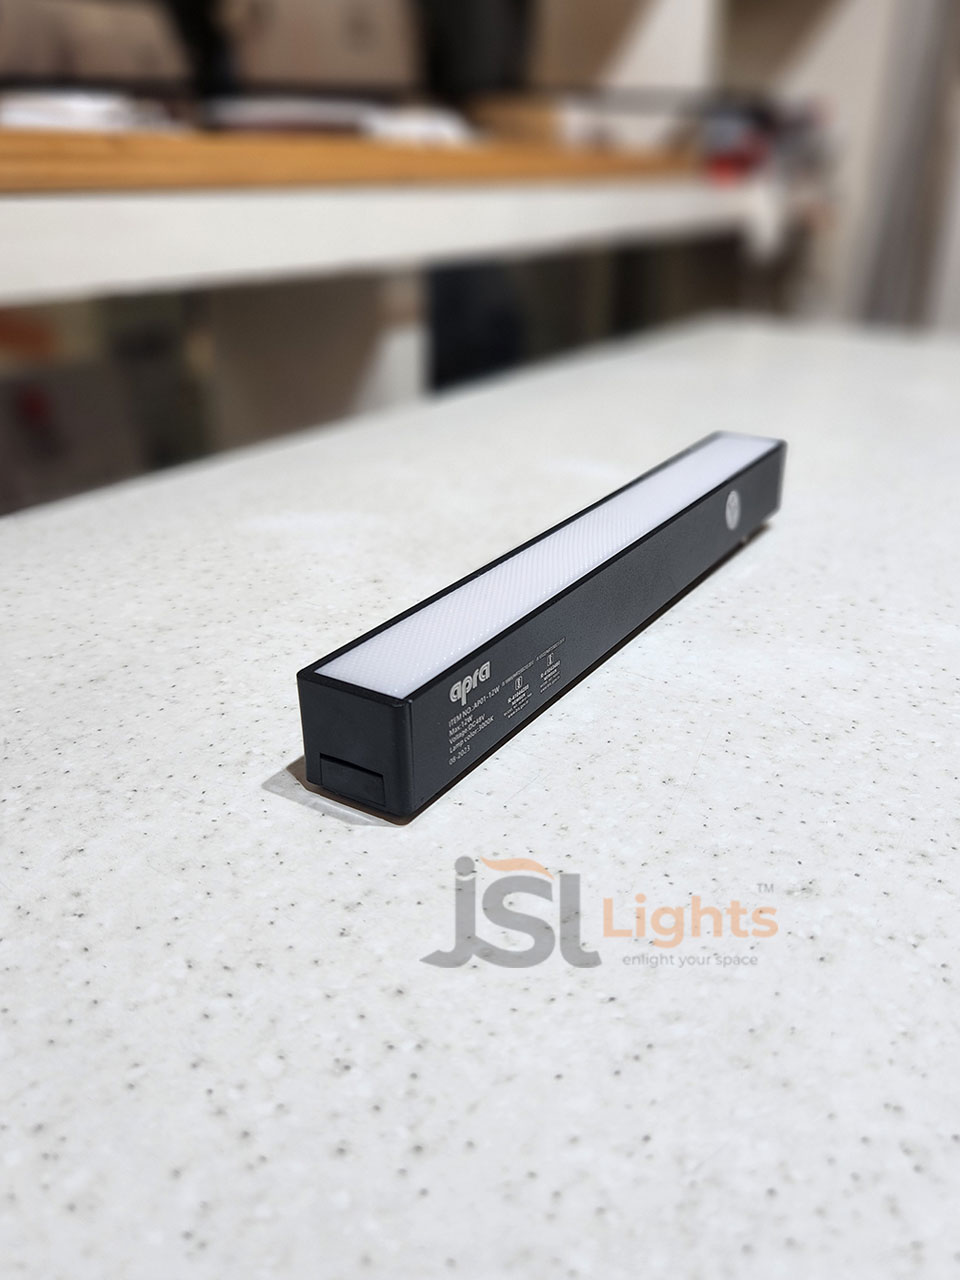 Apra 6W Ultra Thin Linear Diffused Magnetic Track Light MG01 SMD Diffuser Linear Ultra Slim Magnetic Track Light with Black Body